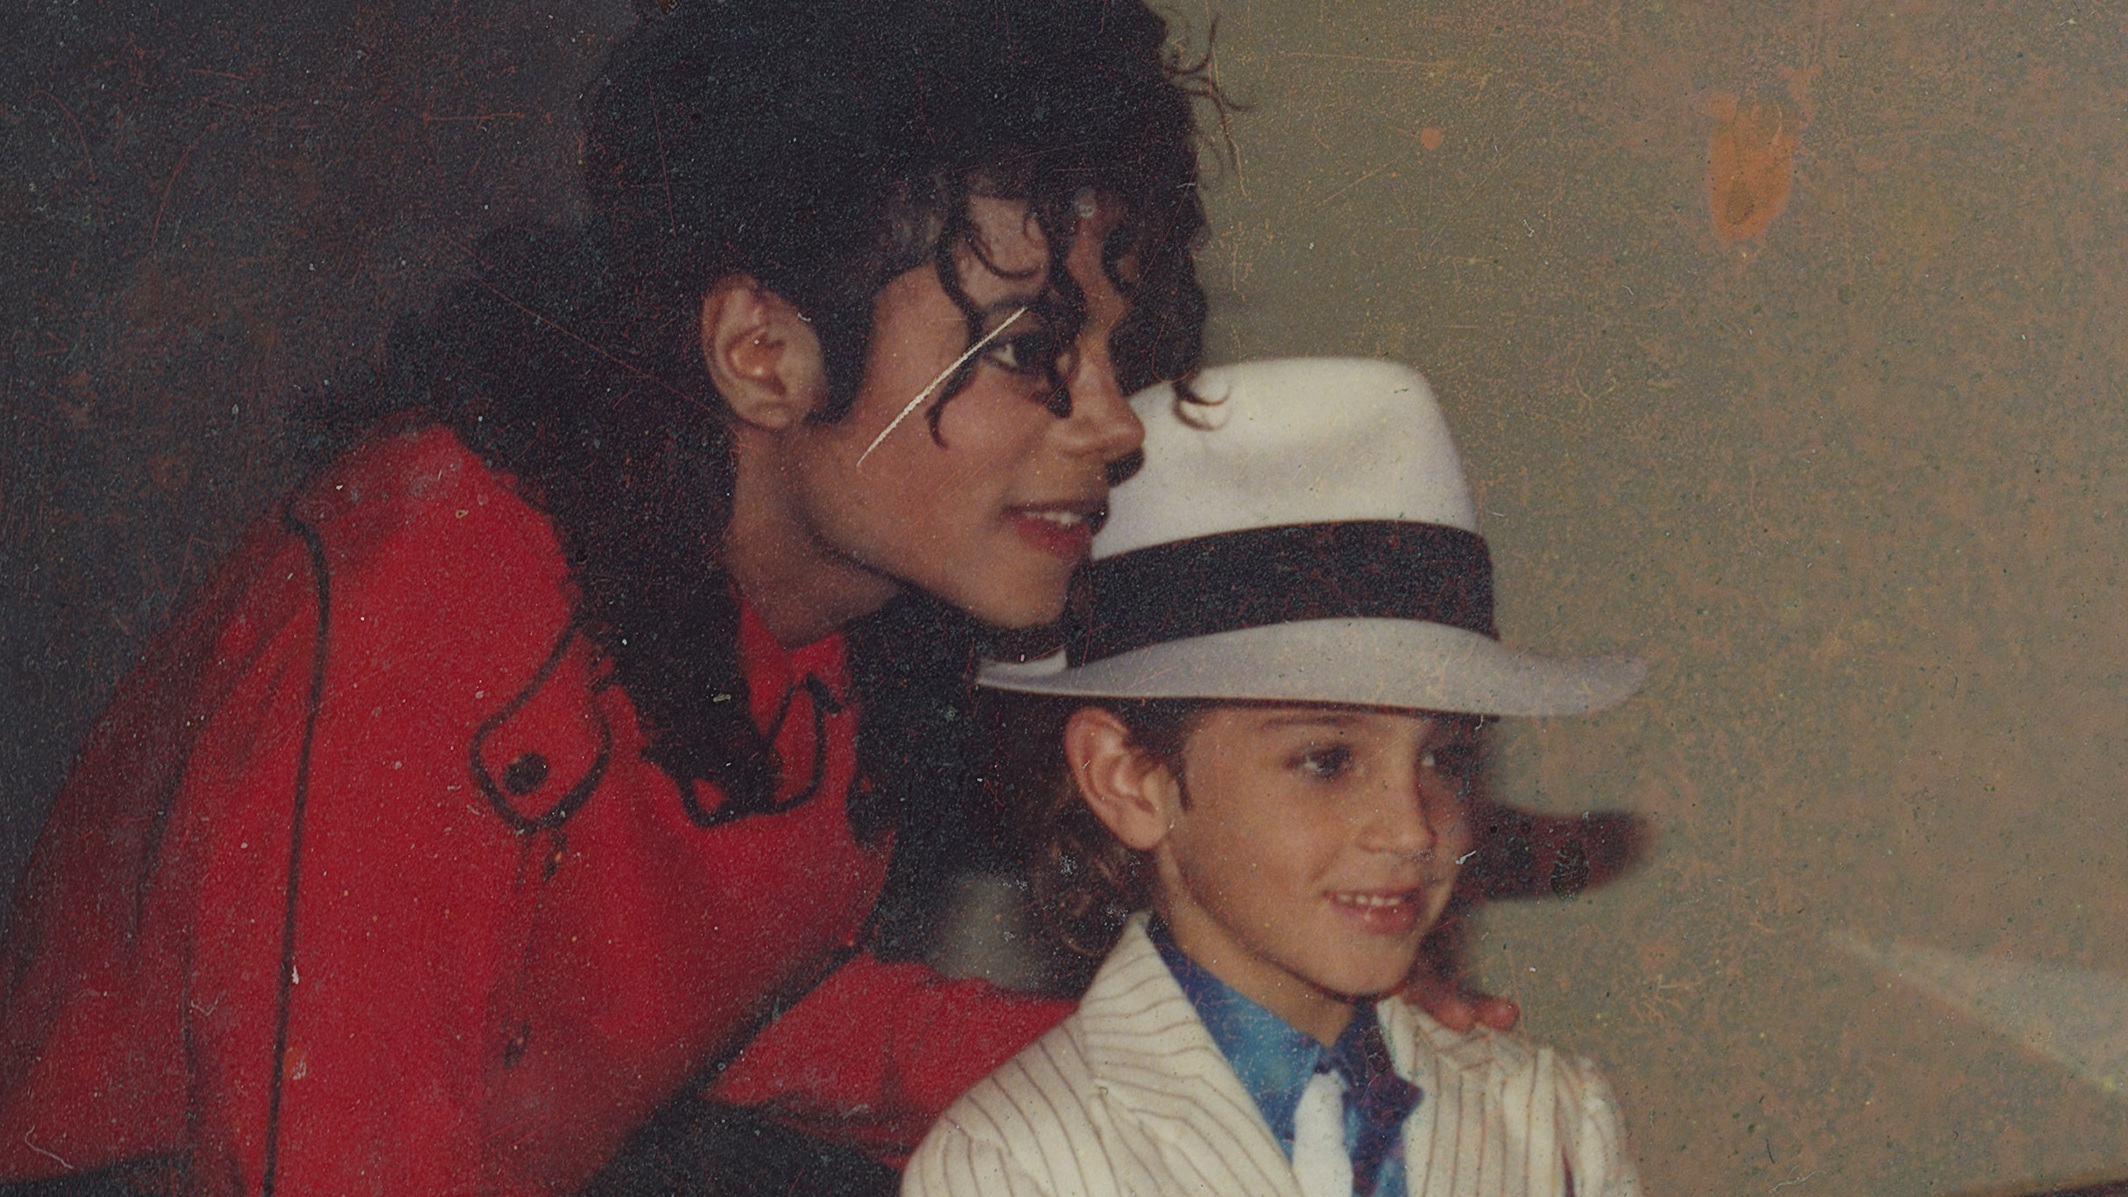 Wade Robson met Michael Jackson more than 30 years ago. "He was one of the kindest, most gentle, loving, caring people I knew," Robson says. "He also sexually abused me for seven years." Robson, pictured above, and James Safechuck — who also met Jackson as a child in the 1980s — tell their stories in the new HBO documentary <em>Leaving Neverland.